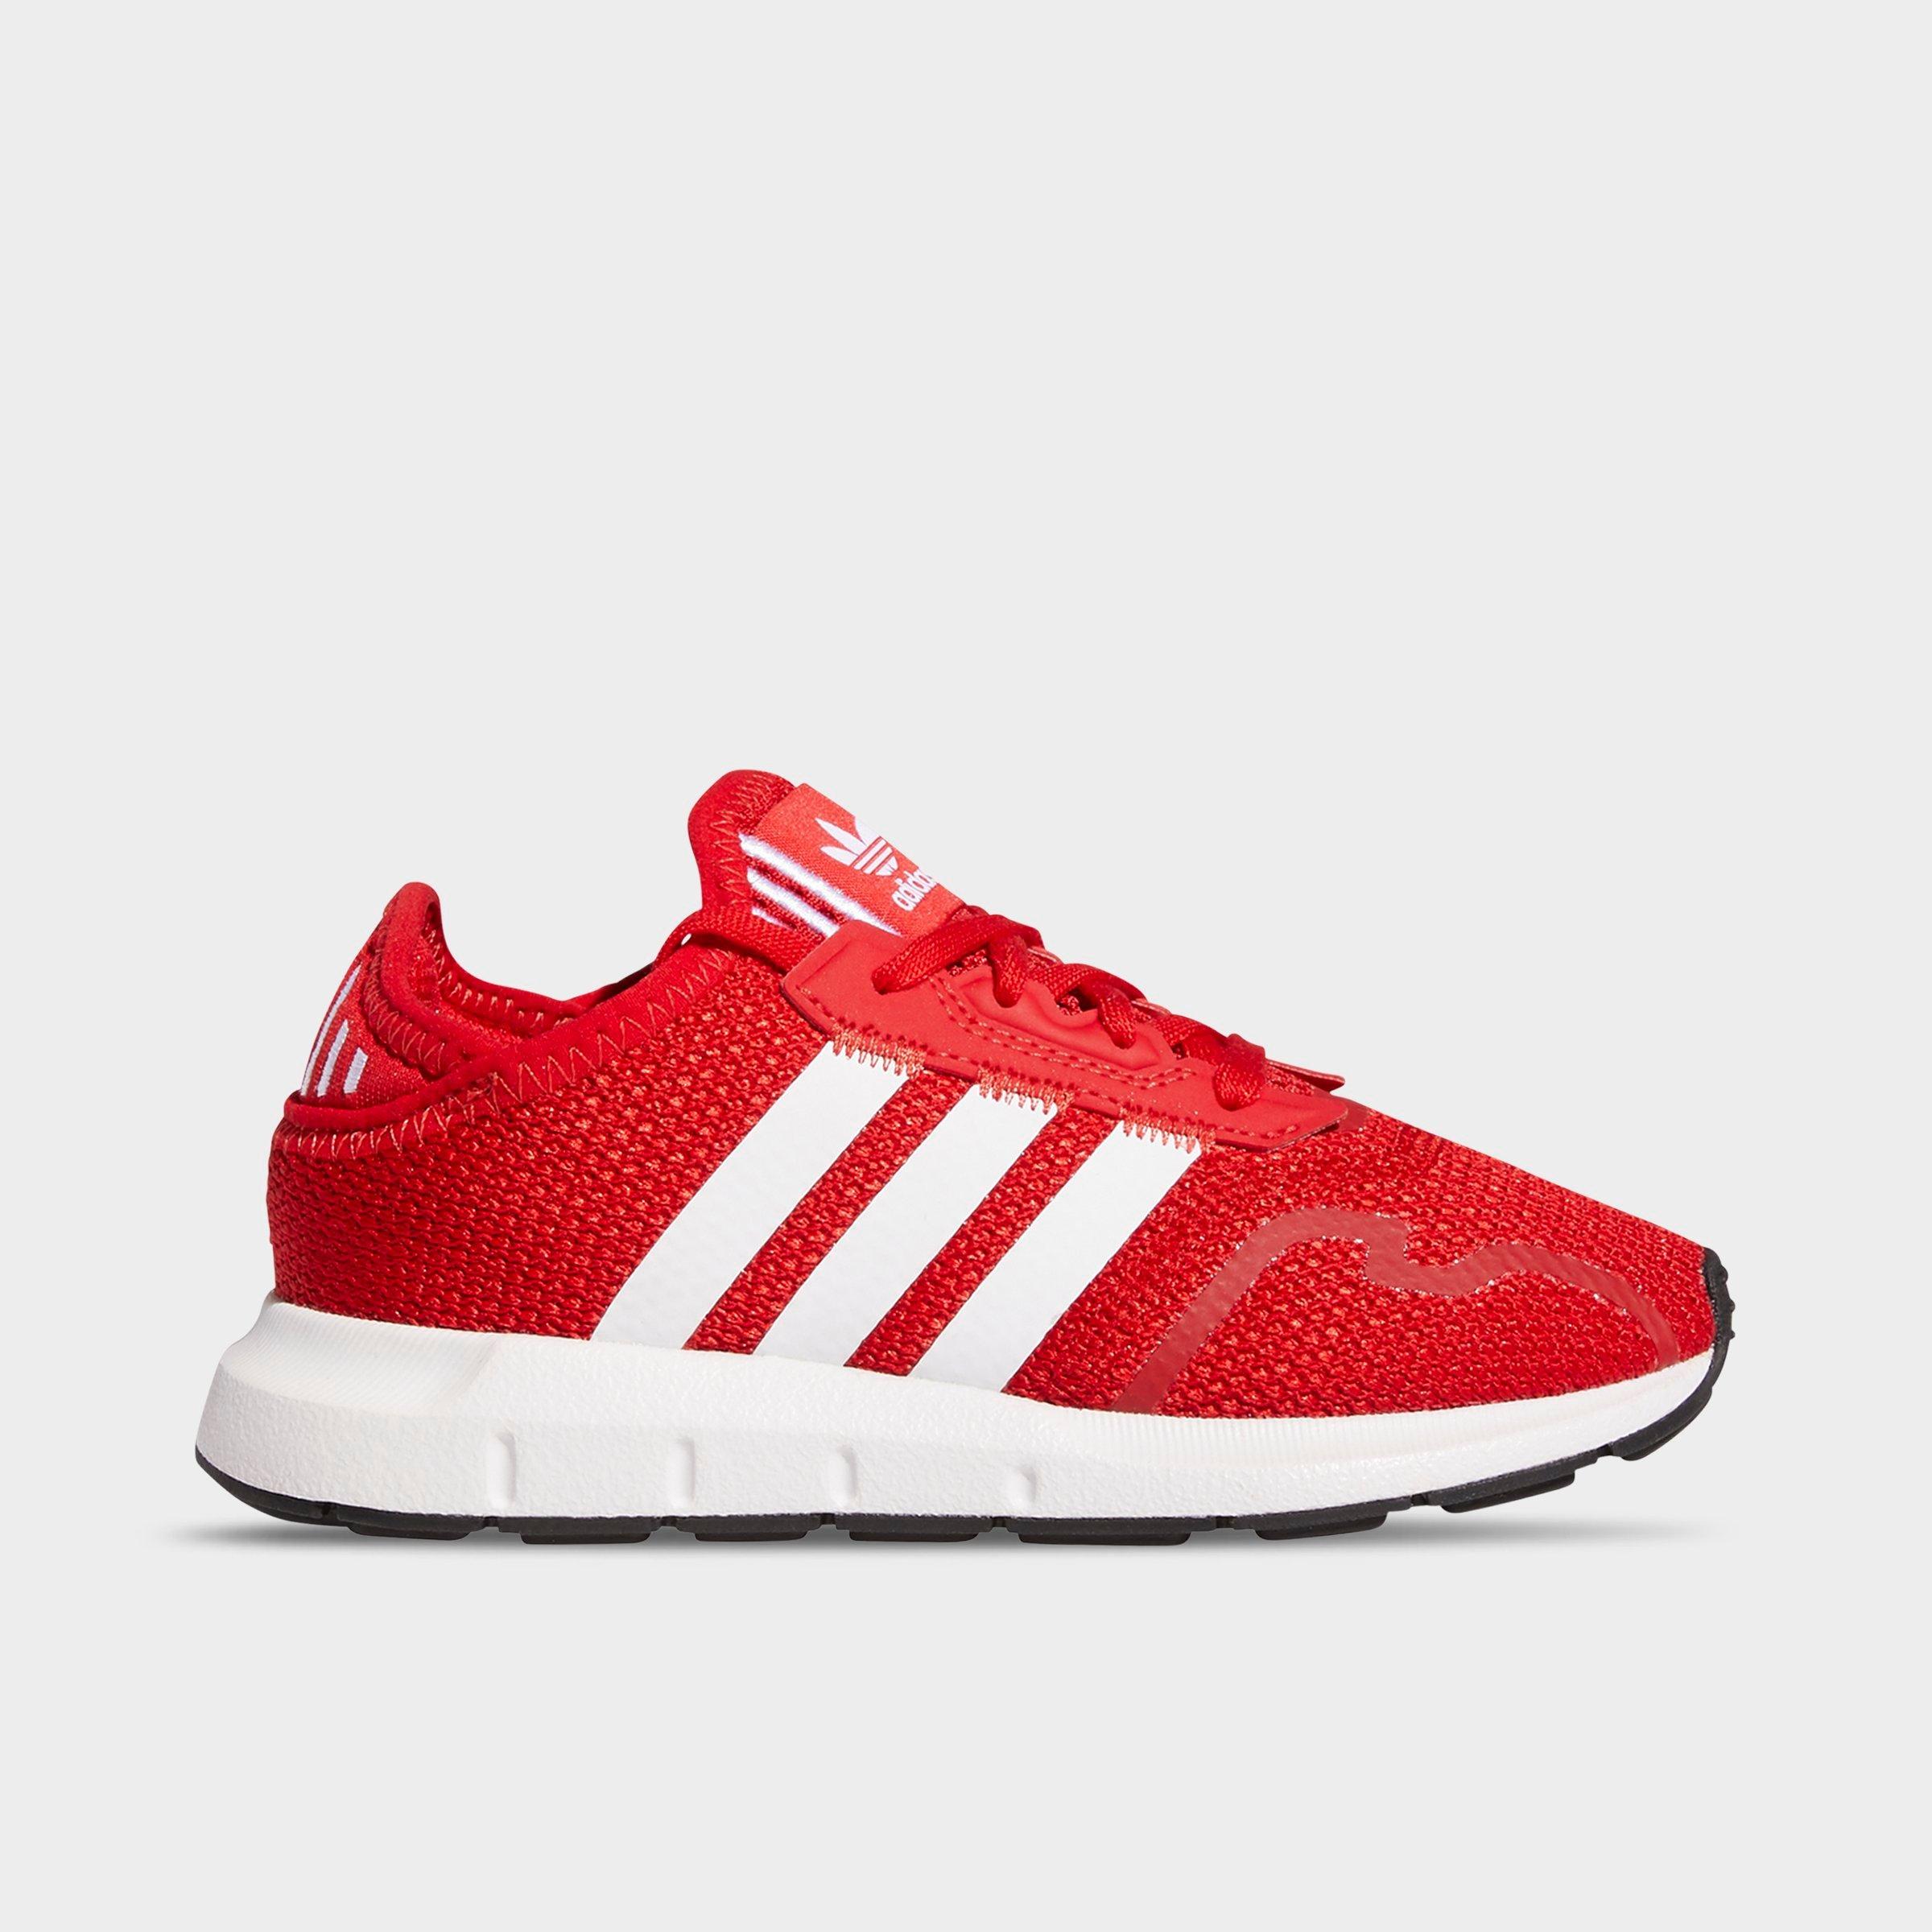 adidas day one shoes red